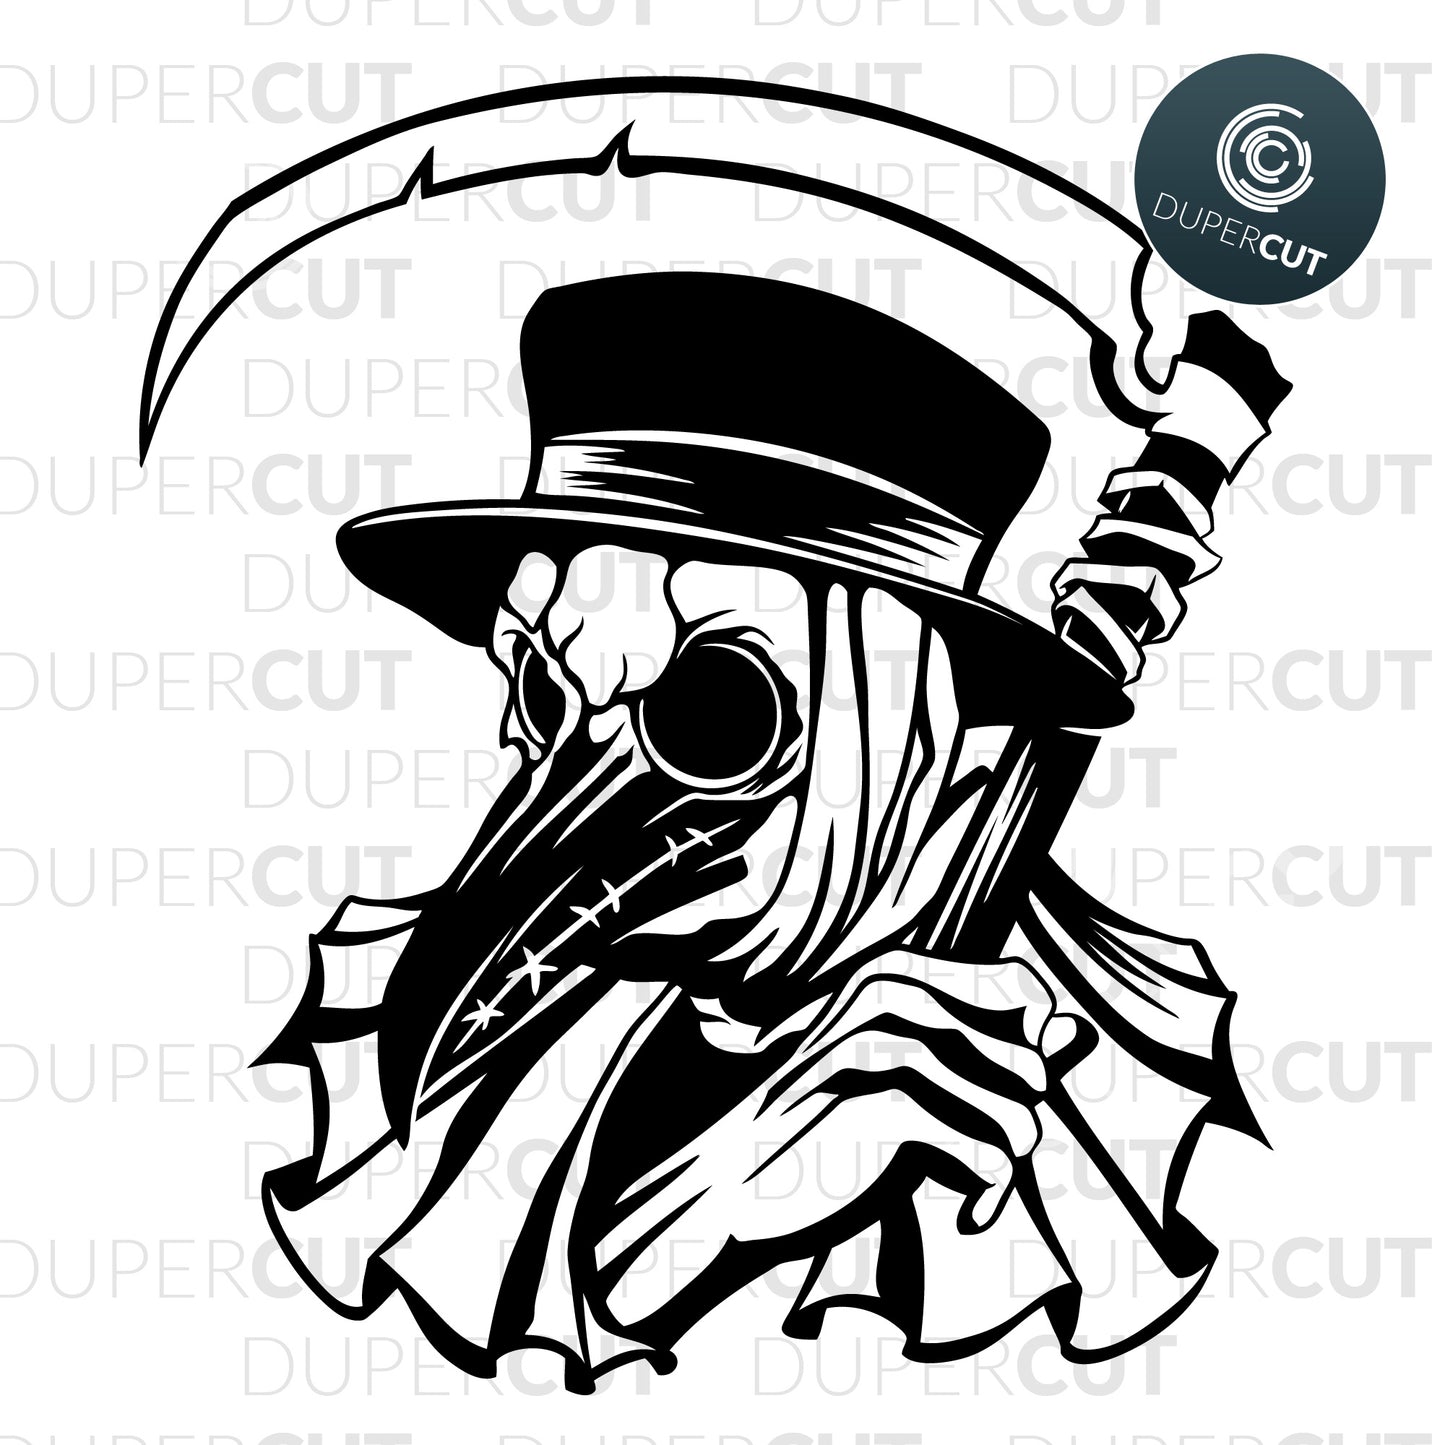 Plague doctor with scythe, tattoo style illustration art  - SVG DXF JPEG files for CNC machines, laser cutting, Cricut, Silhouette Cameo, Glowforge engraving